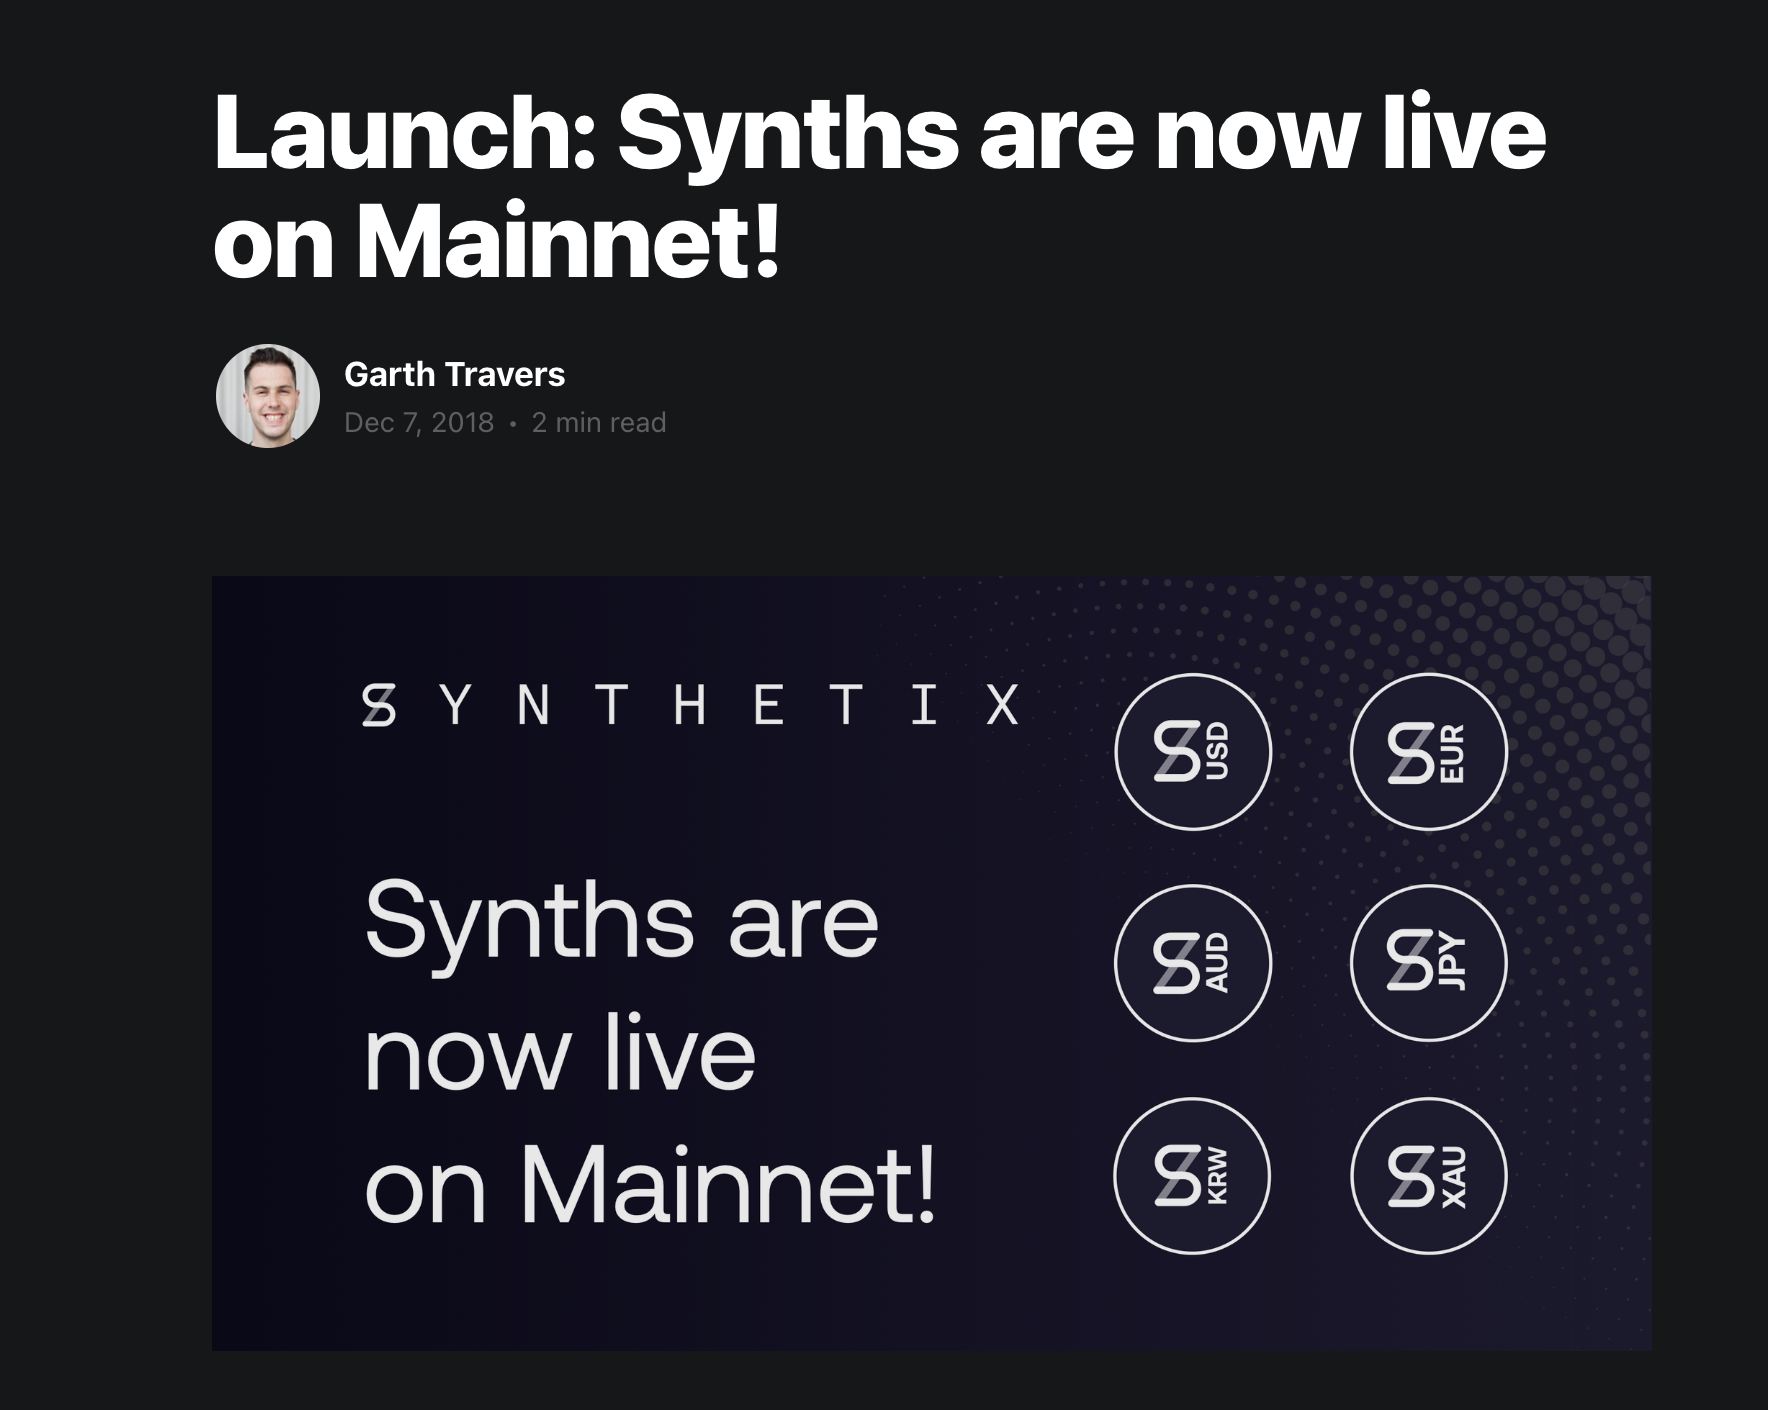 https://blog.synthetix.io/launch-synths-are-now-live-on-mainnet/